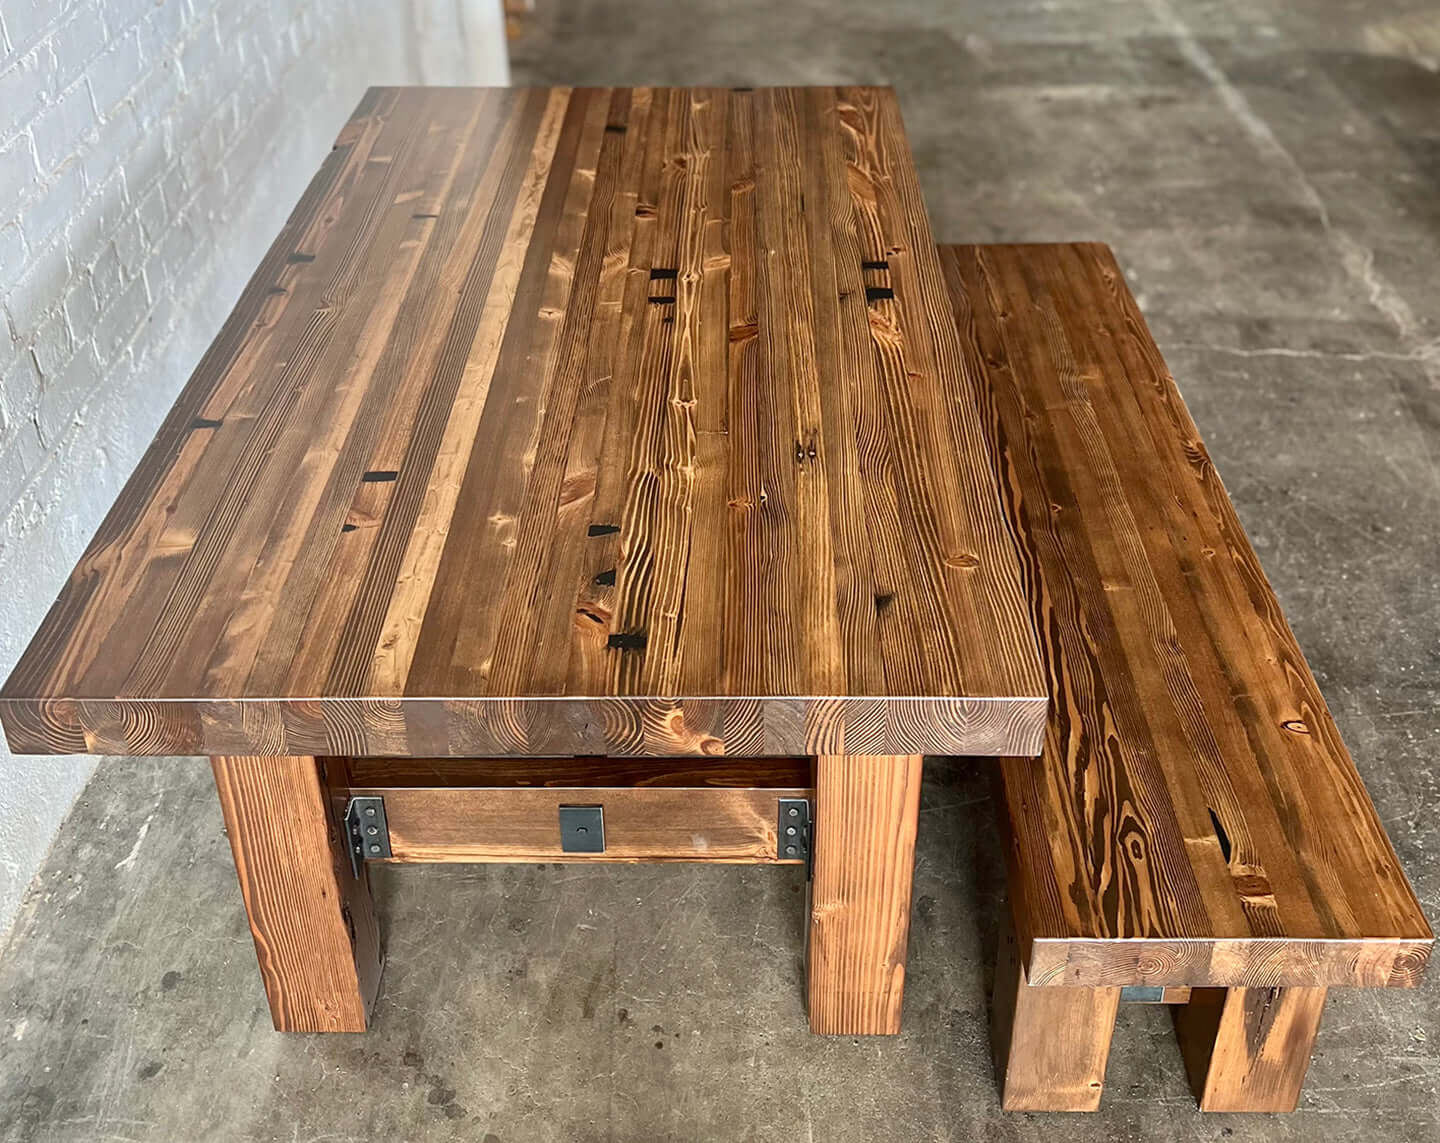 Ambassador Reclaimed Wood Table And